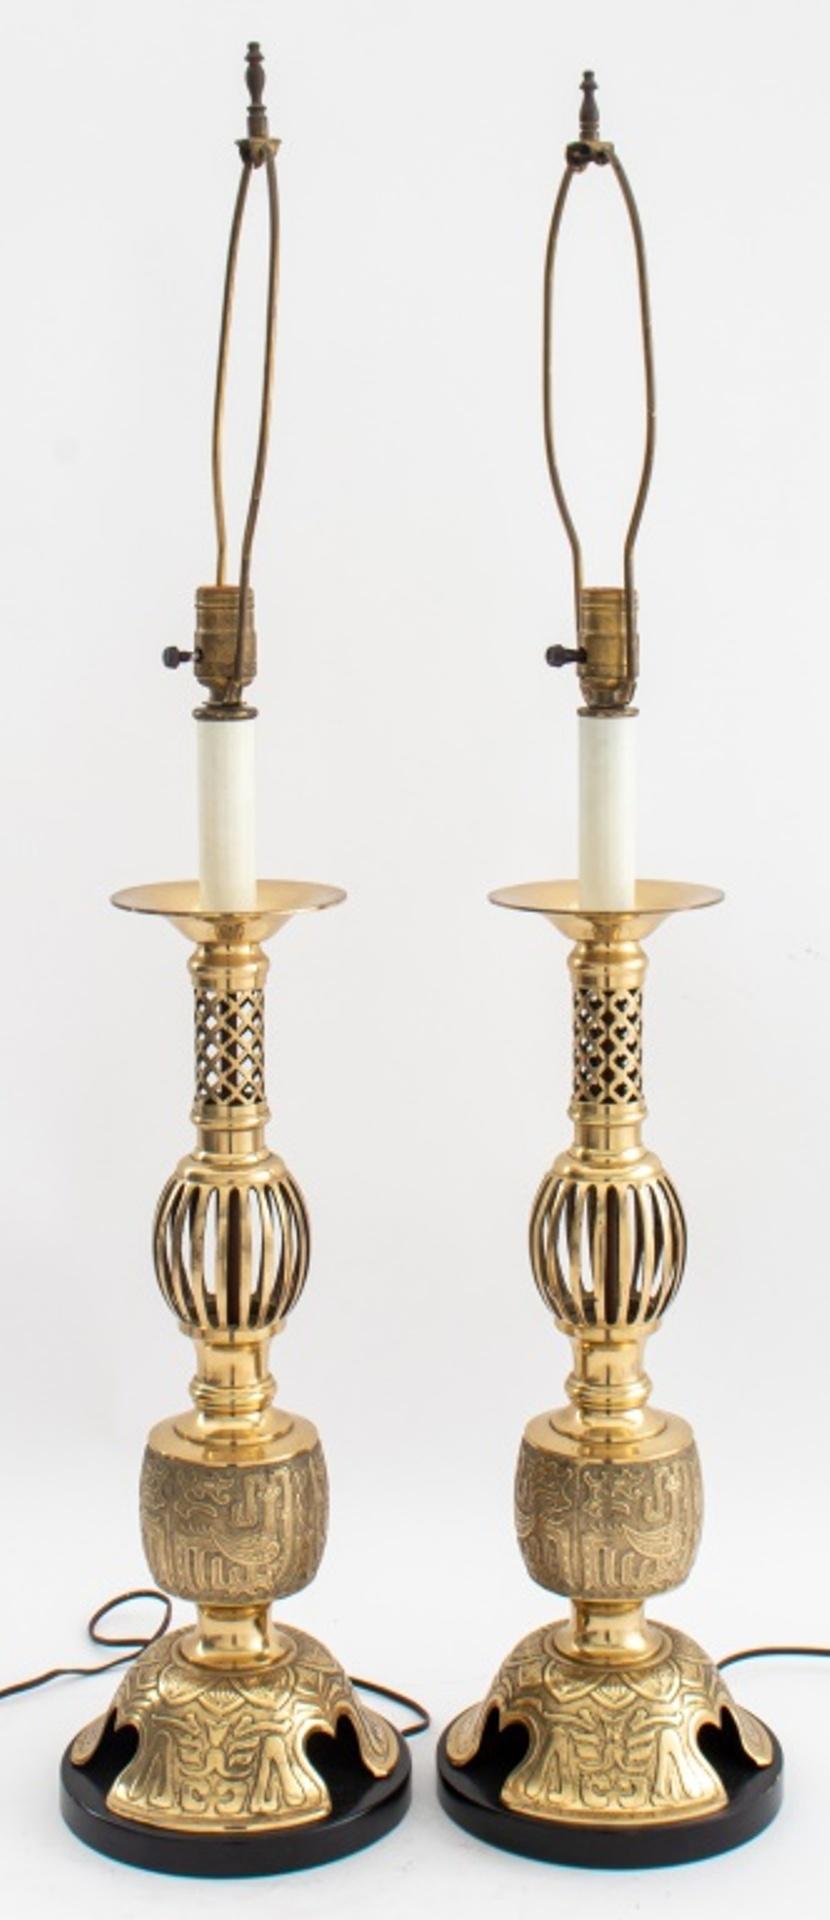 Asian modern style table lamps, pair, c. 1970s, in the form of candle pricket sticks, with openwork sides and heavily debossed base with Shang Dynasty-inspired symbols on tripartite circular base. 39